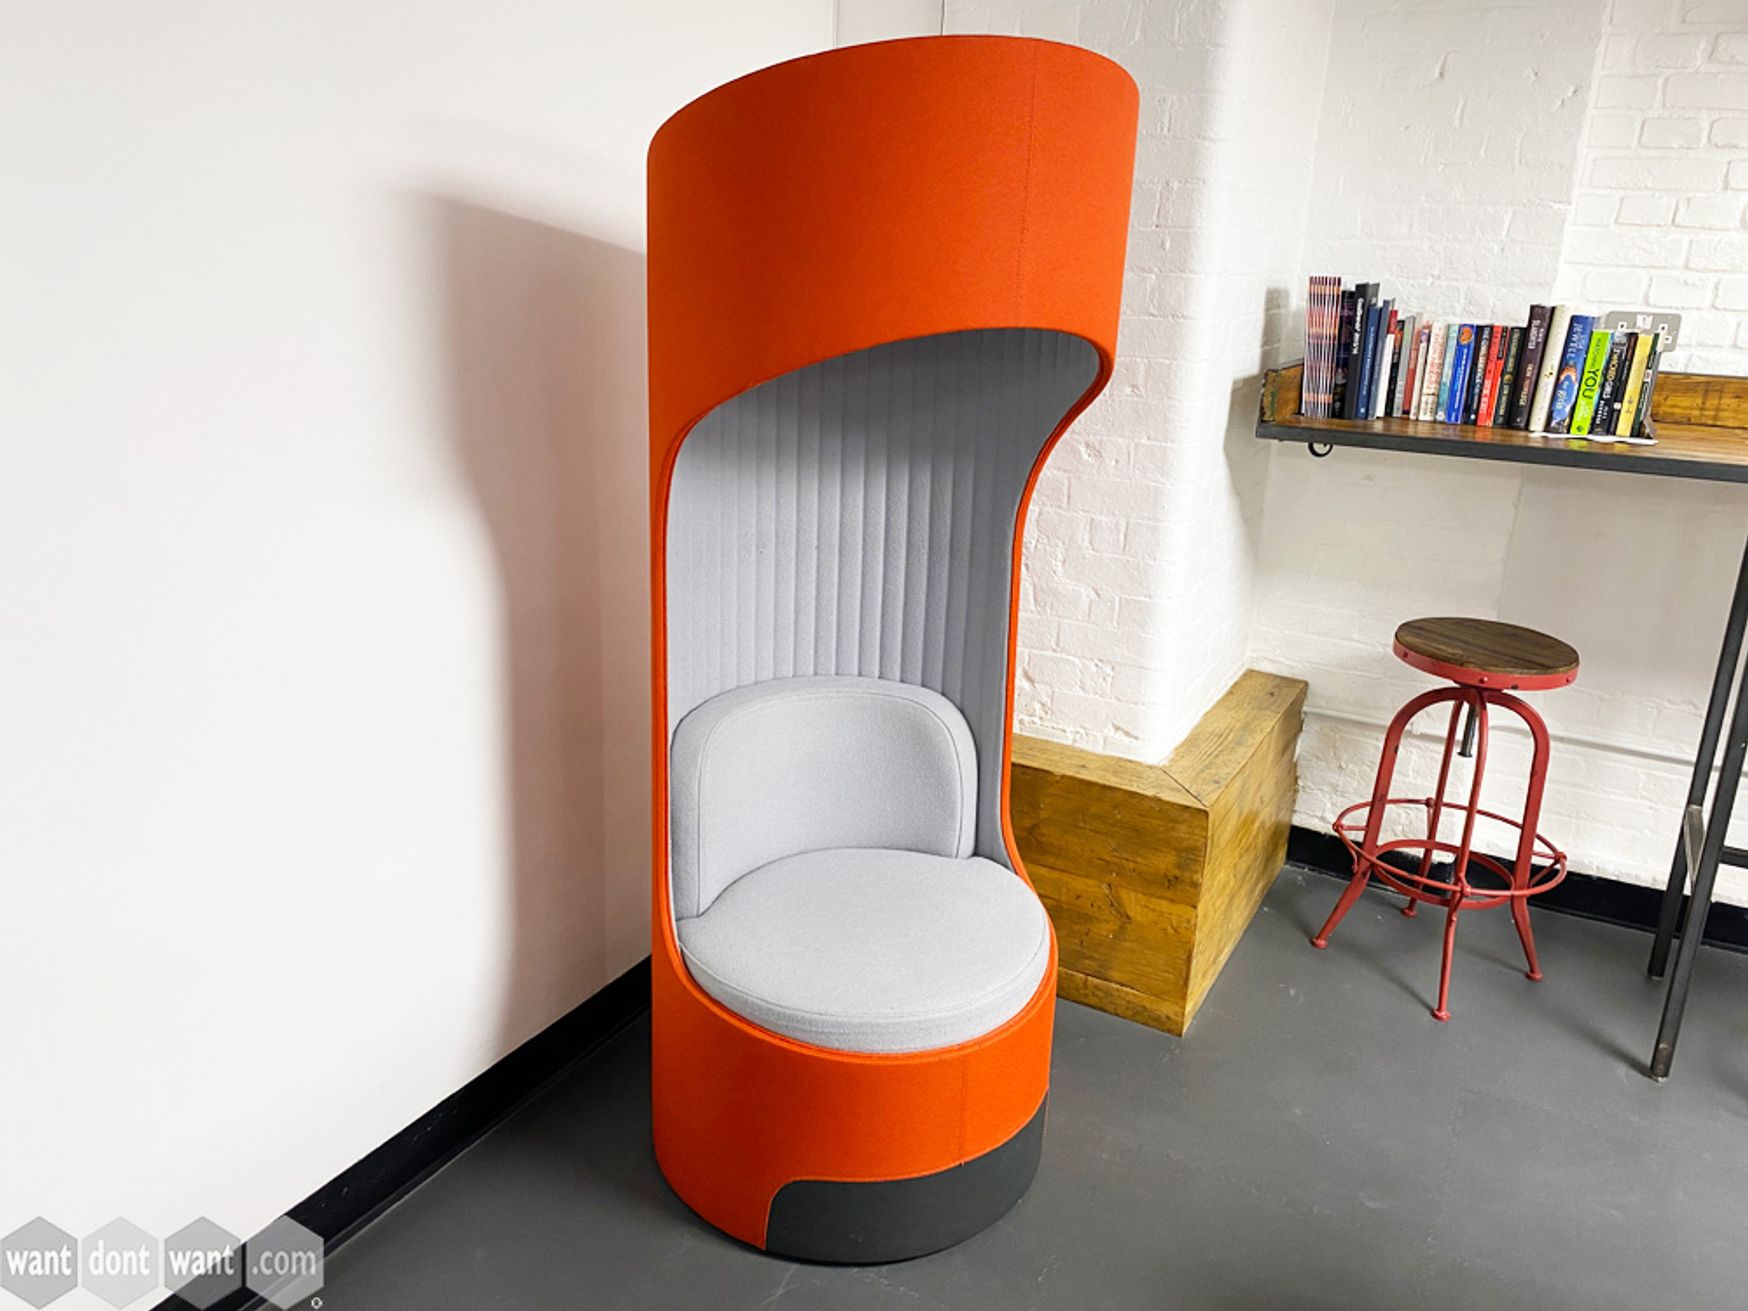 Used Boss 'Cega' swivel cubicle chair with high acoustic quality.